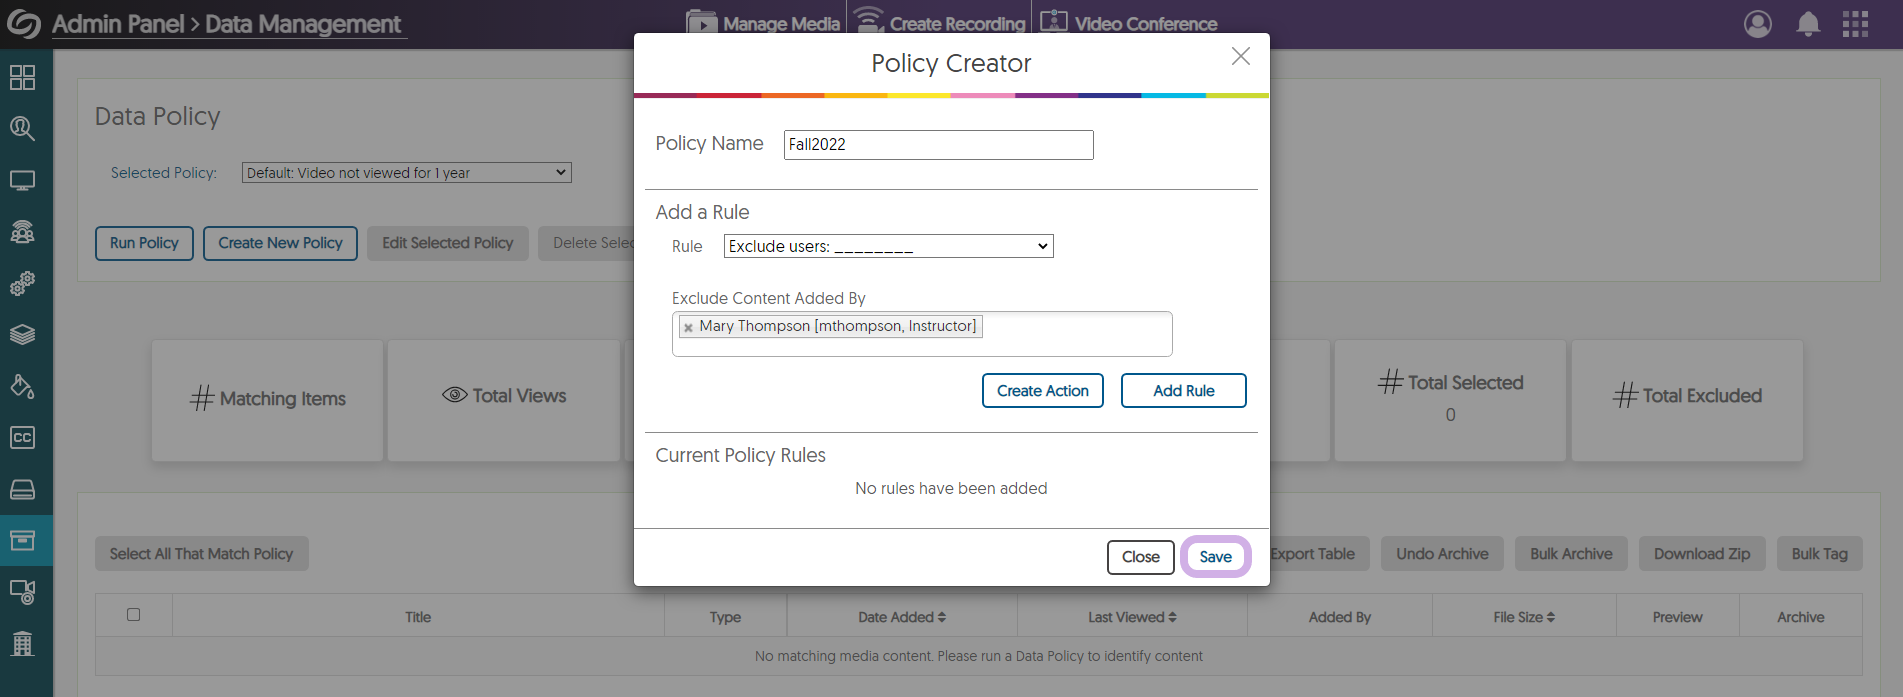 Policy Creator window with Save highlighted.